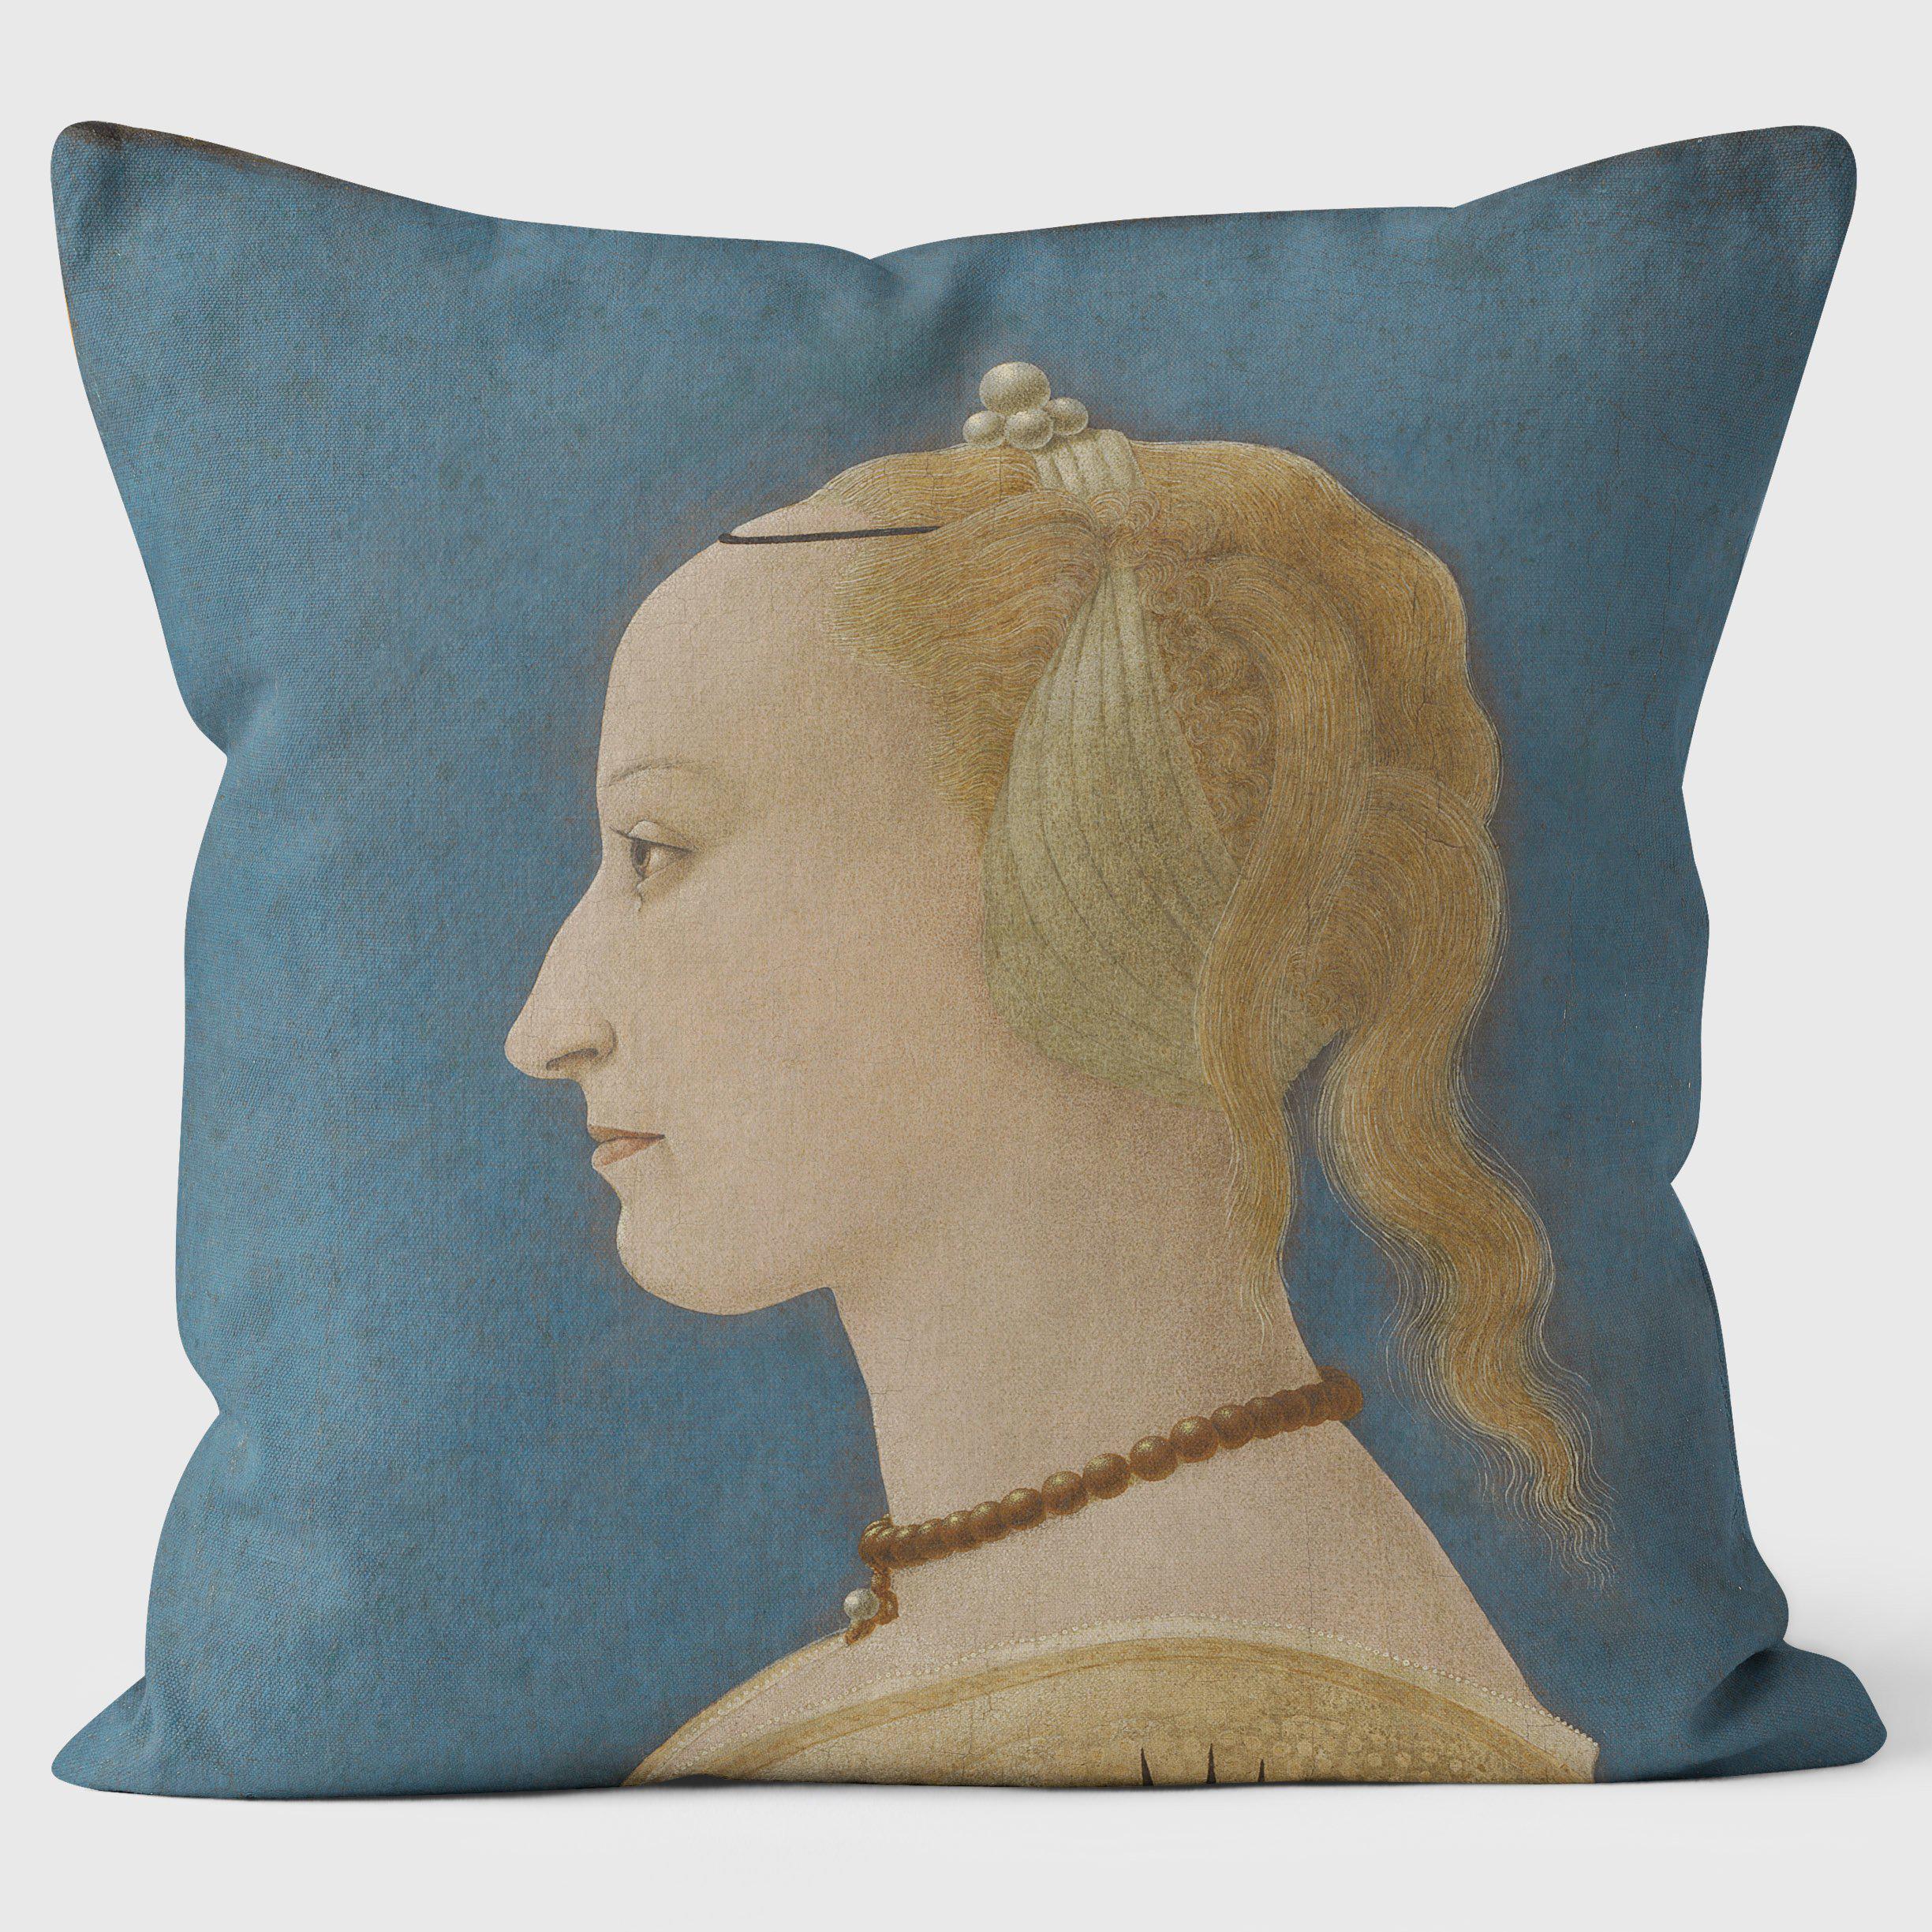 Portrait of a Lady - Alesso Baldovinetti’s -National Gallery Cushion - Handmade Cushions UK - WeLoveCushions